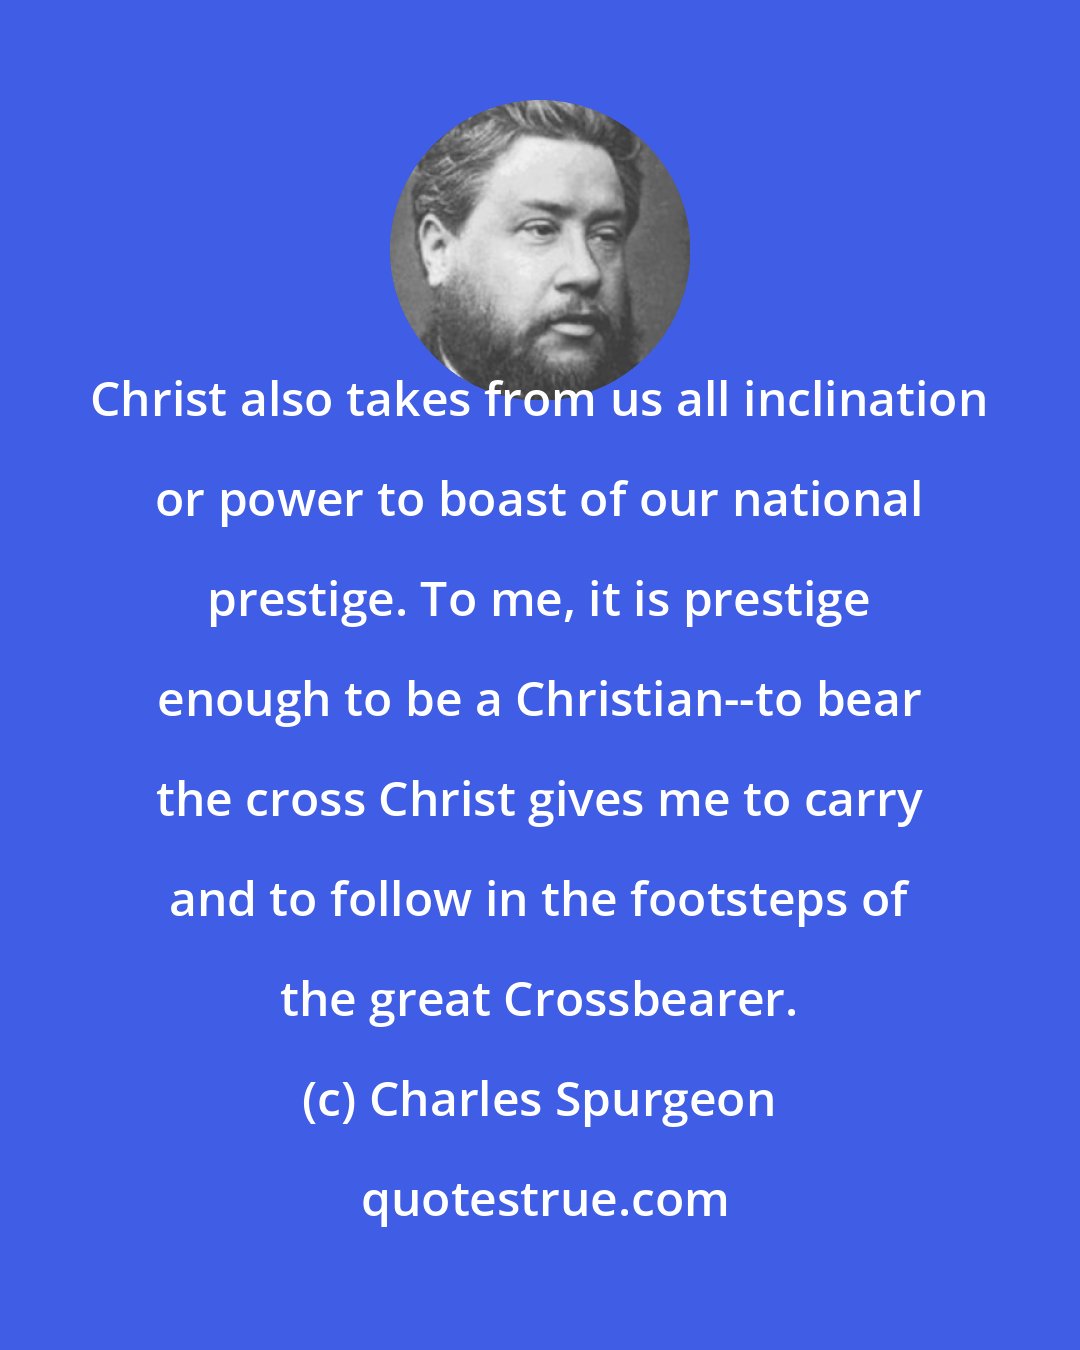 Charles Spurgeon: Christ also takes from us all inclination or power to boast of our national prestige. To me, it is prestige enough to be a Christian--to bear the cross Christ gives me to carry and to follow in the footsteps of the great Crossbearer.